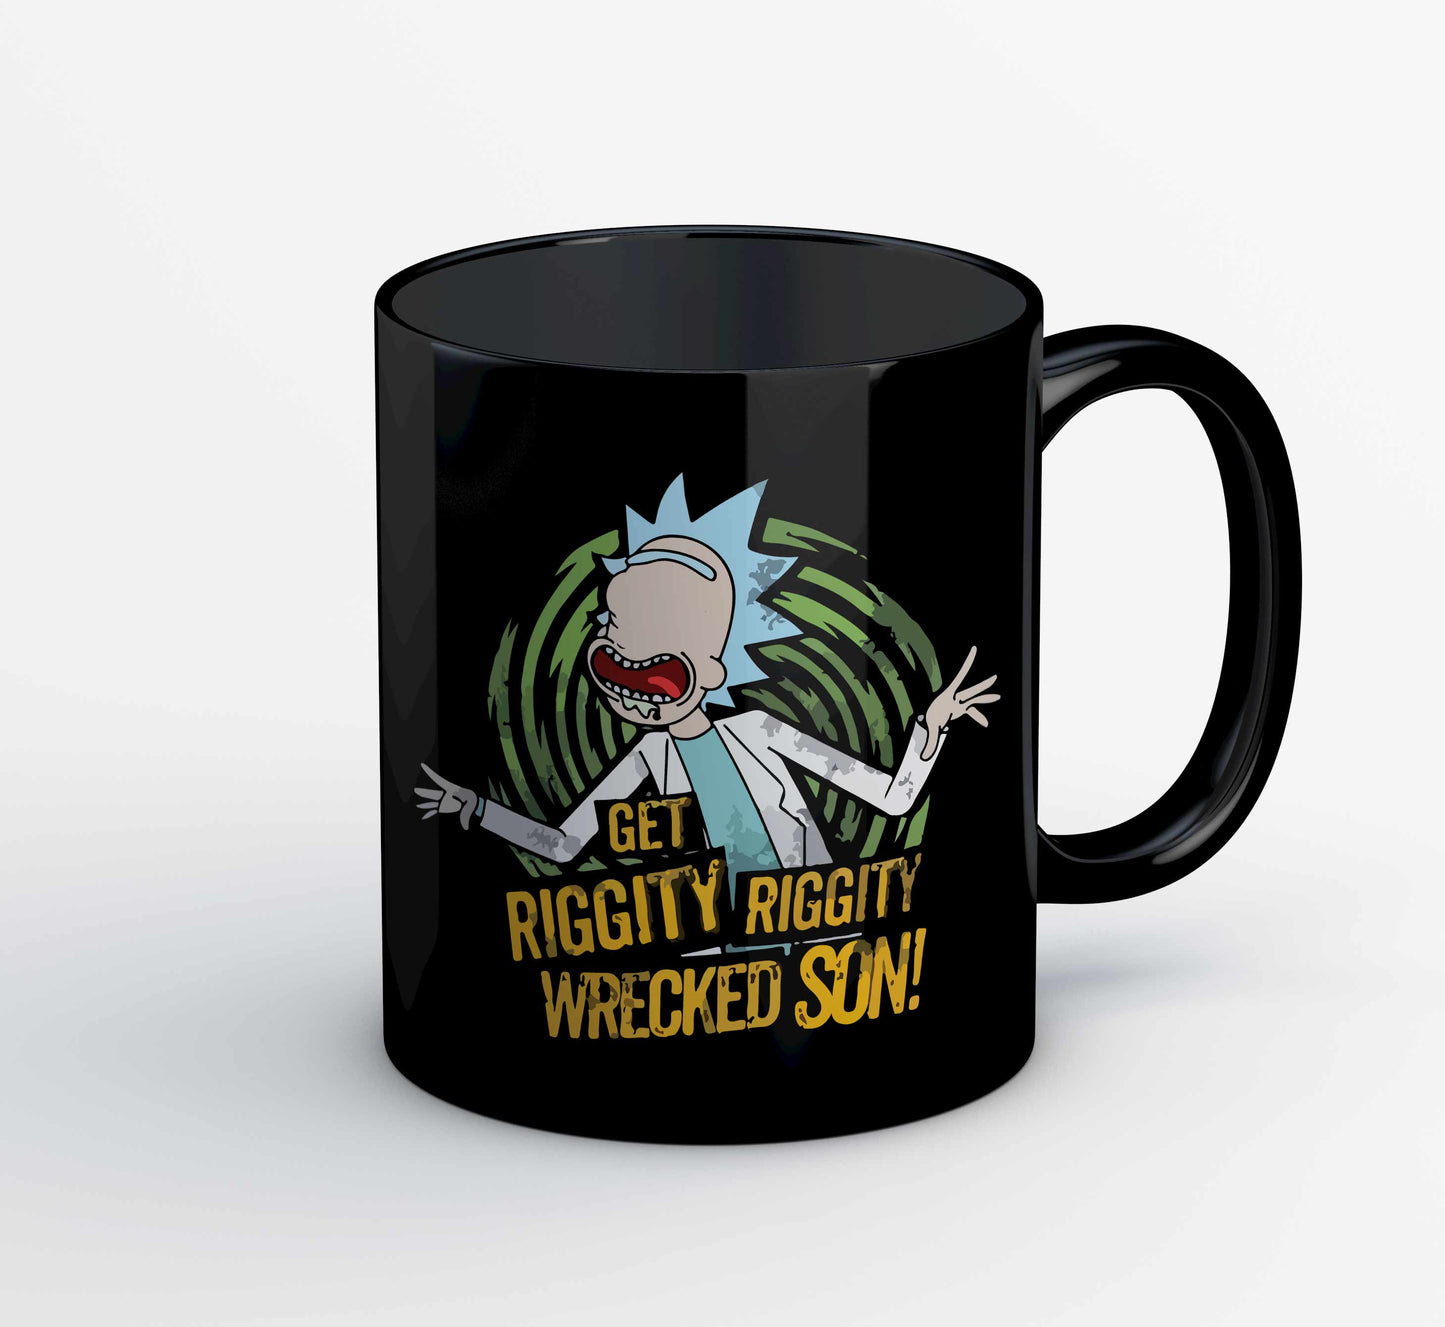 rick and morty riggity mug coffee ceramic buy online india the banyan tee tbt men women girls boys unisex  rick and morty online summer beth mr meeseeks jerry quote vector art clothing accessories merchandise